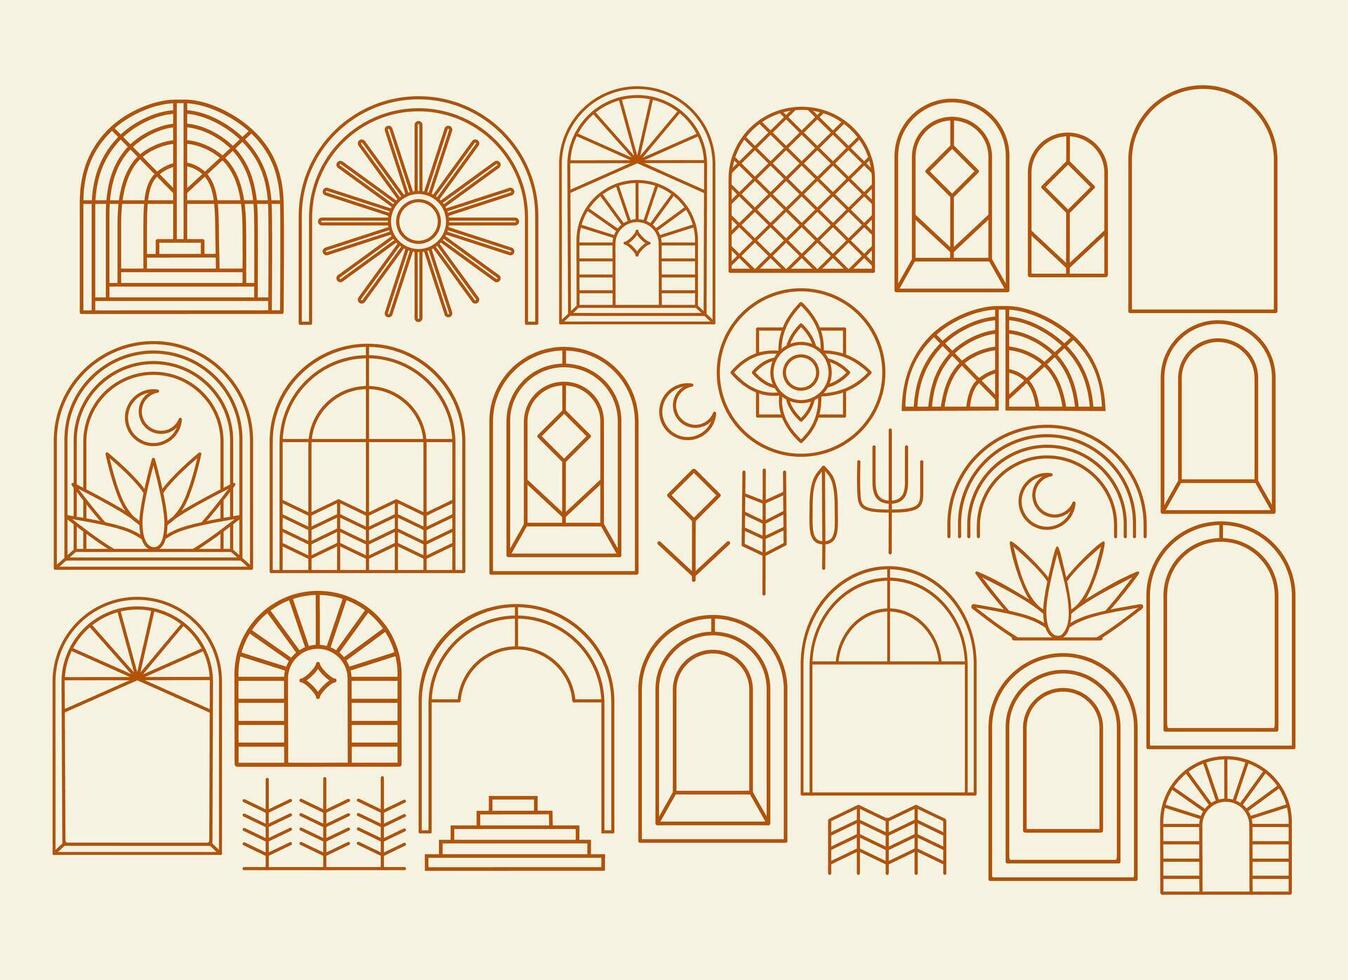 Bohemian linear icons, symbol, frame, arches. Set of boho contour icon, border in minimal style. For logo design, social media stories, advertising, cosmetics packaging, postcard. Vector illustration.